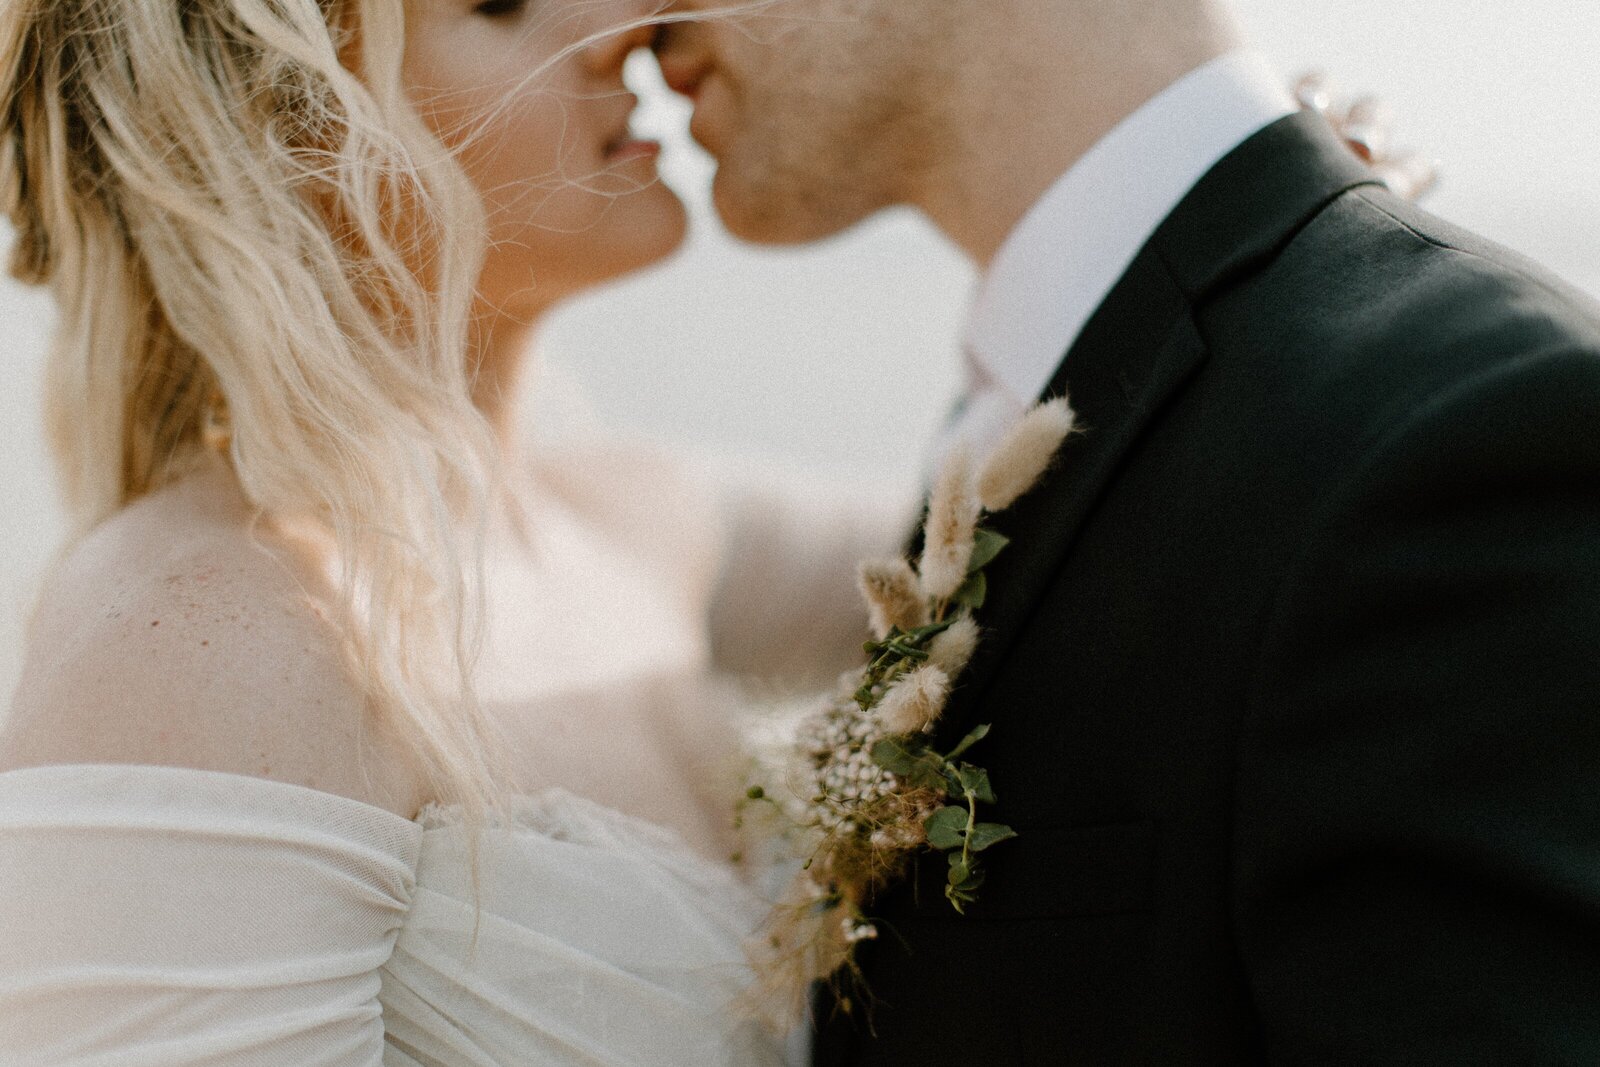 detail of bride and groom kissing close up